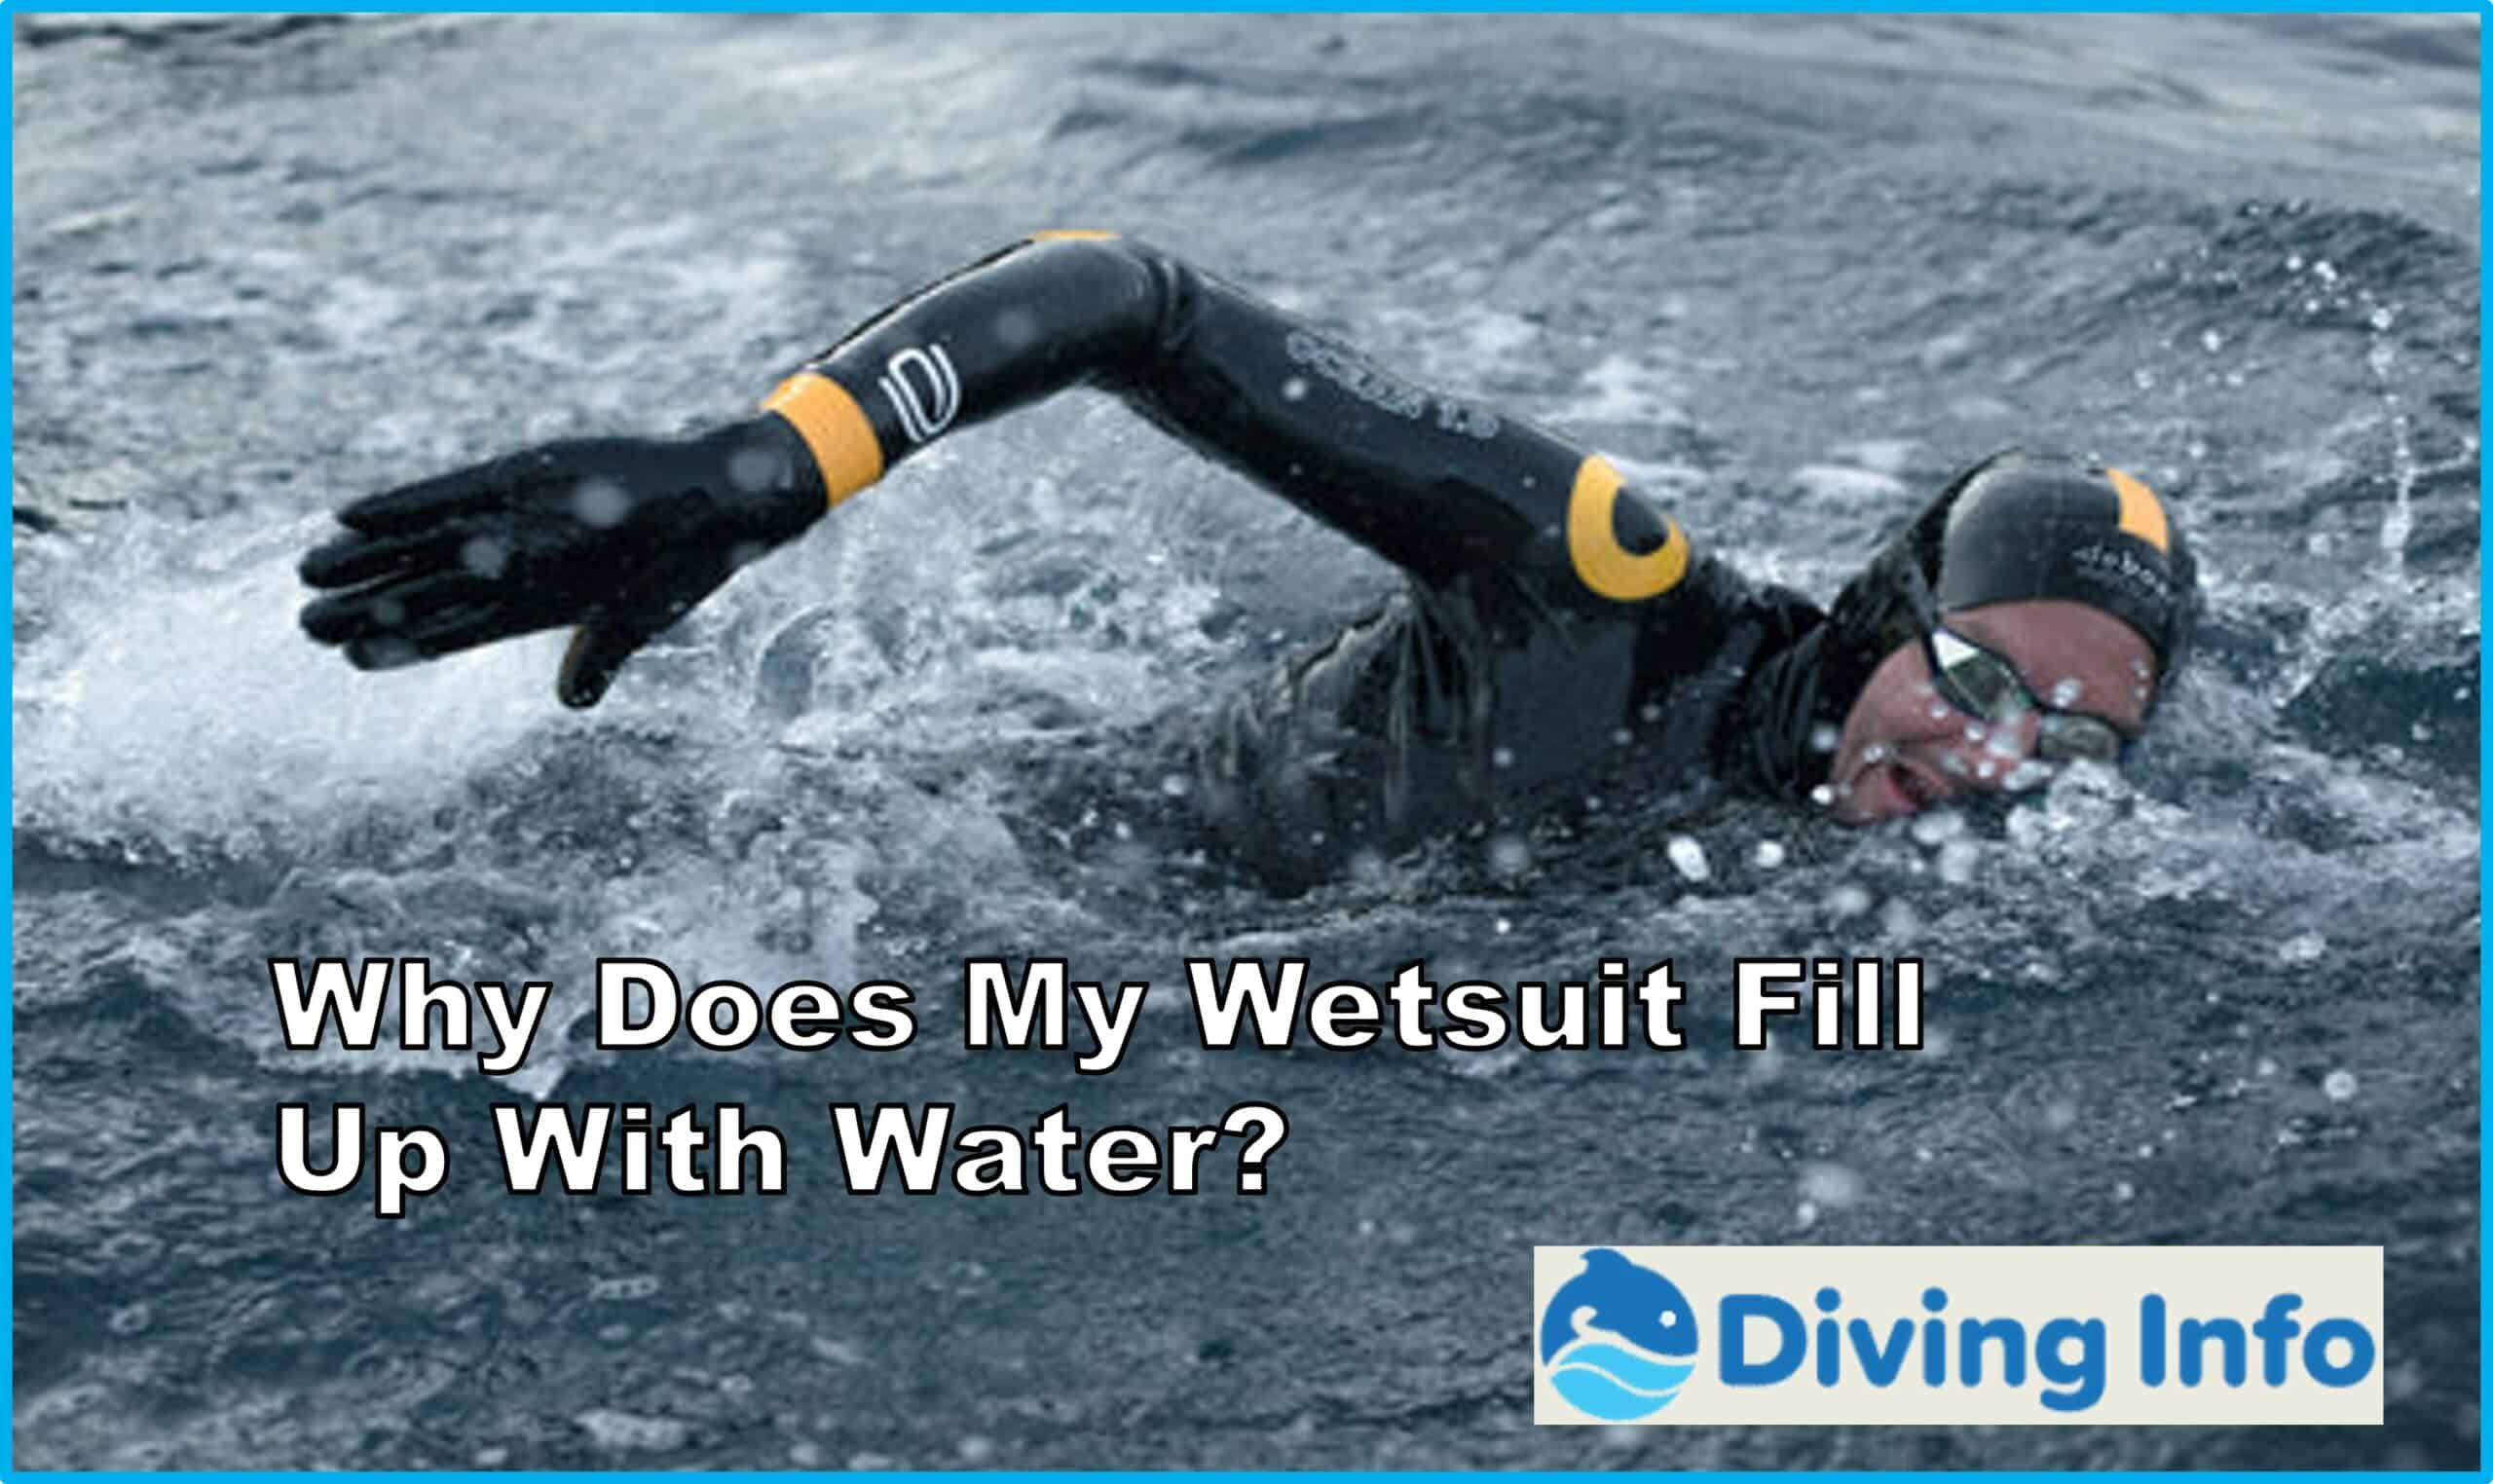 Why Does My Wetsuit Fill Up With Water?